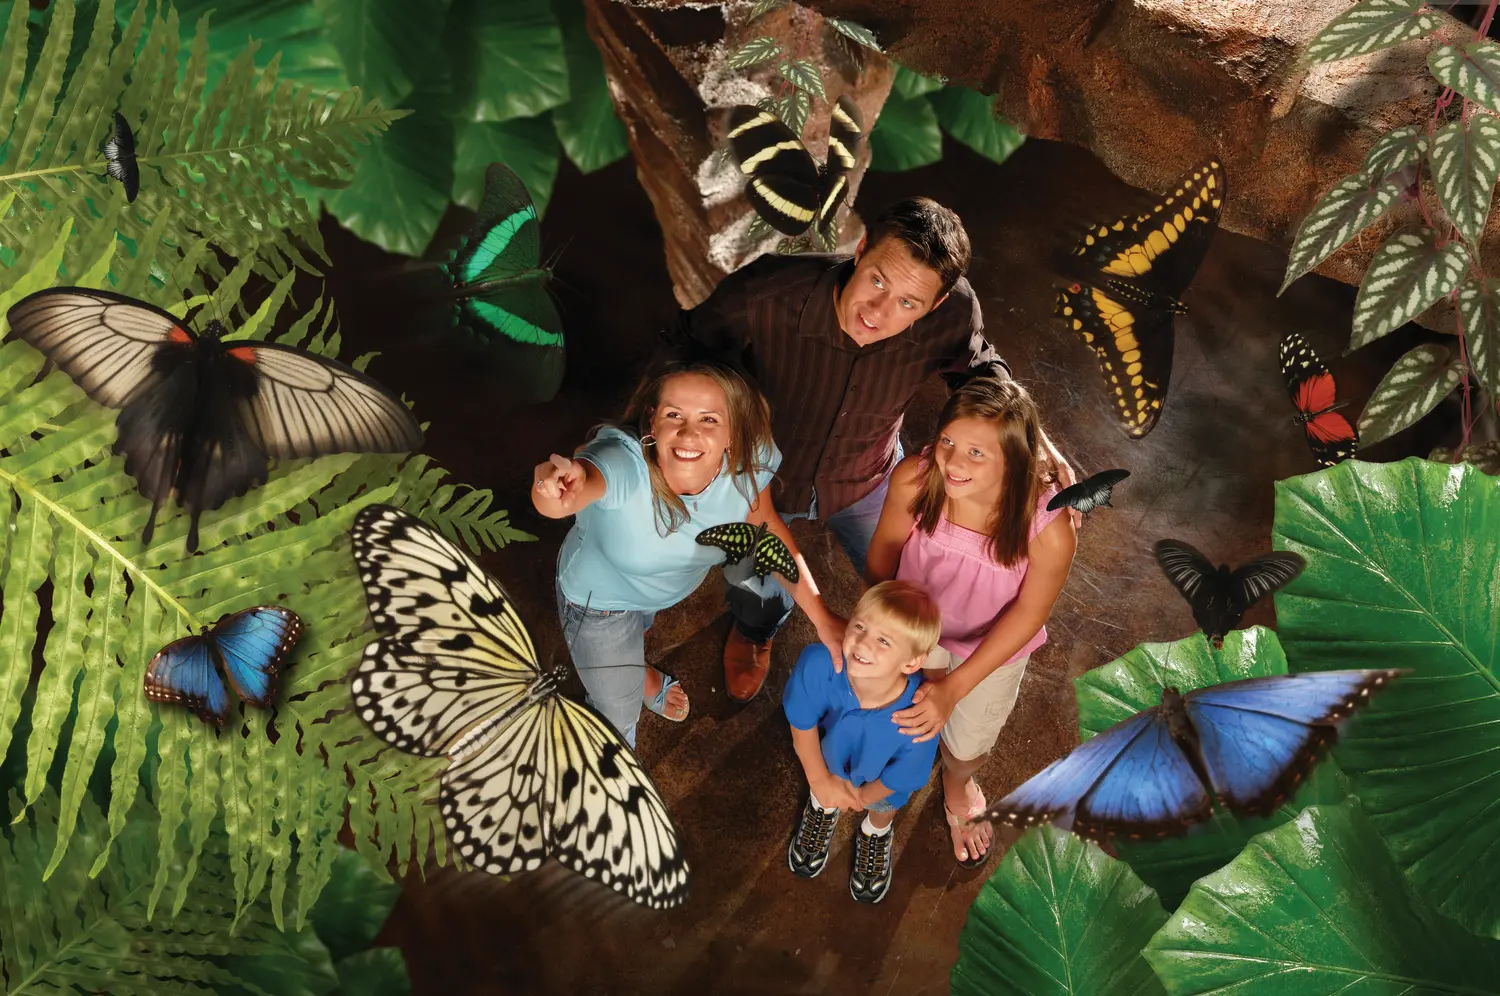 A family admiring the colorful butterflies at the Butterfly Palace in Branson, MO.